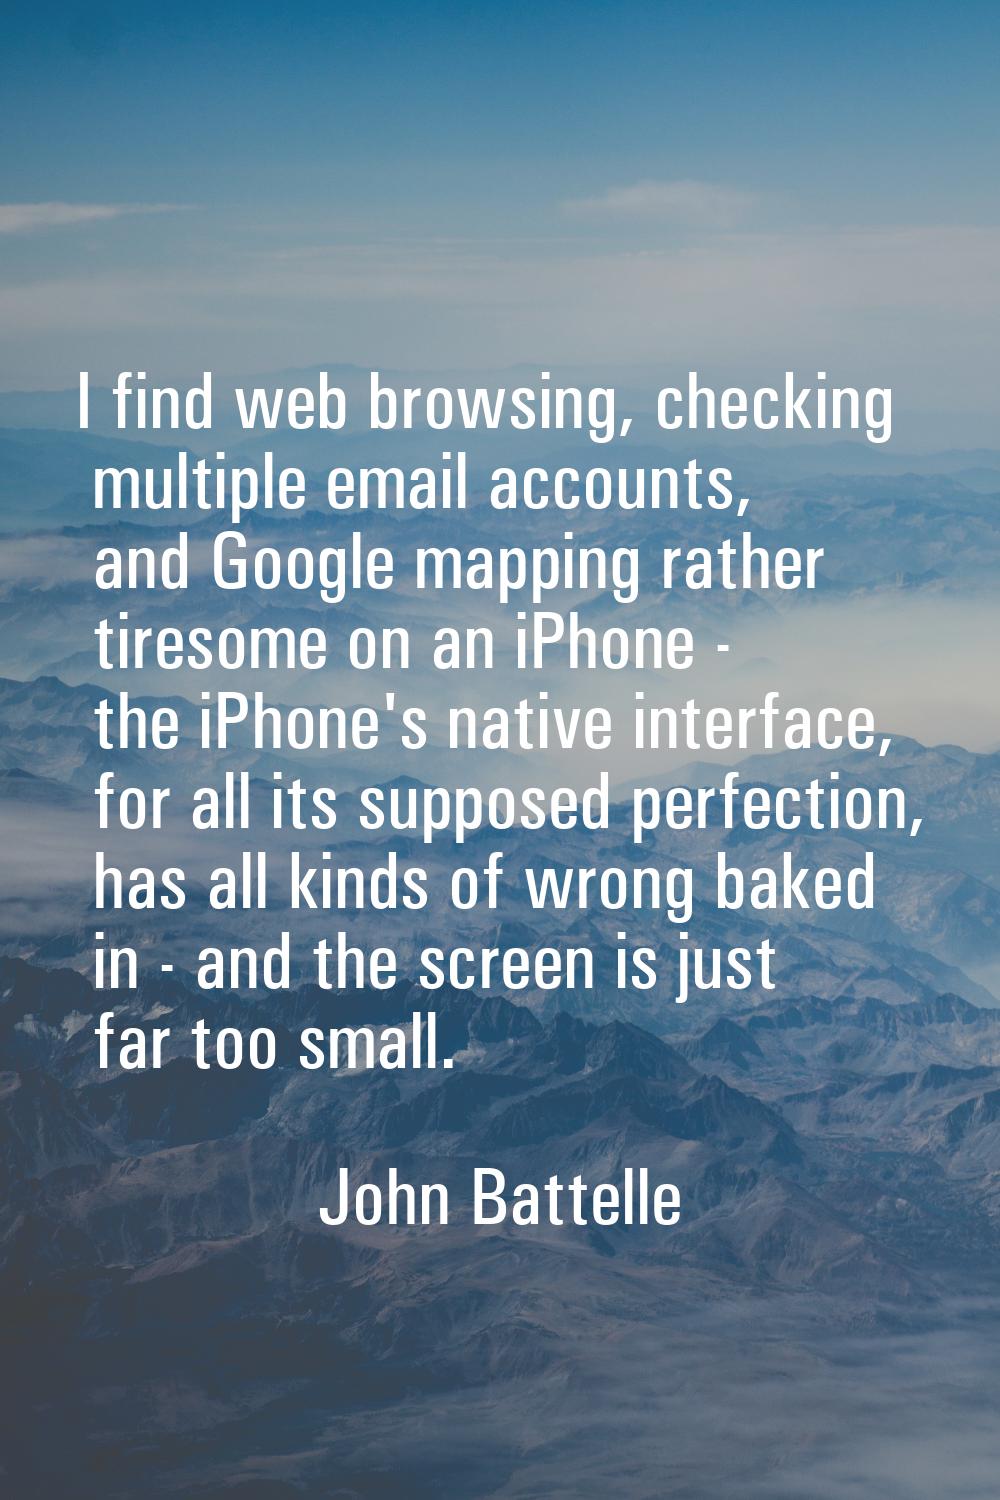 I find web browsing, checking multiple email accounts, and Google mapping rather tiresome on an iPh